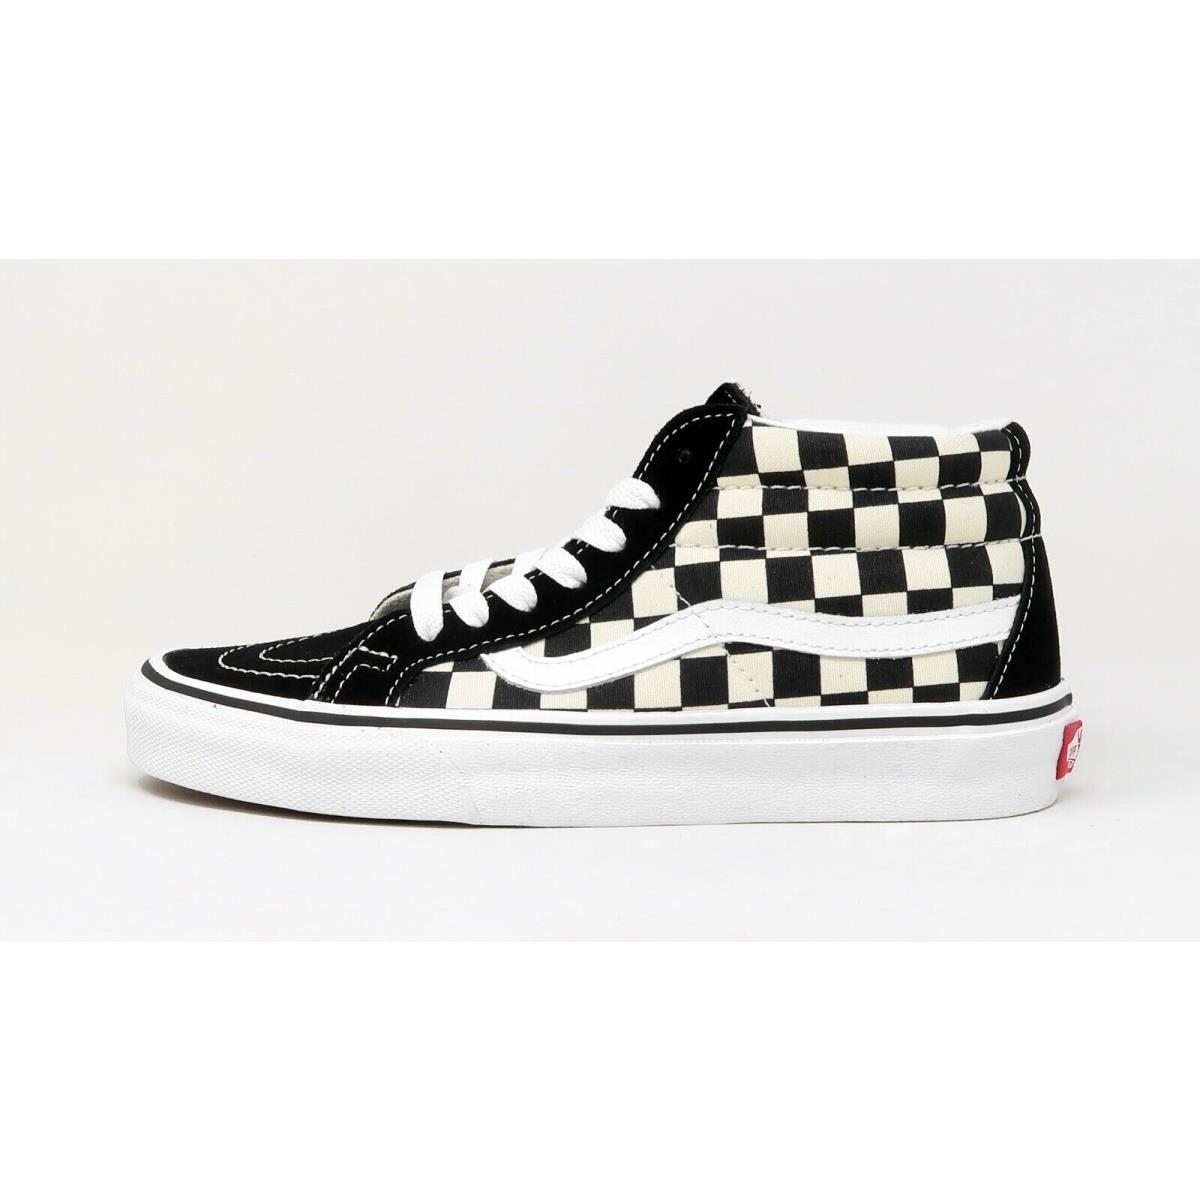 Vans Sk8 Mid Reissue Canvas Checkerboard Women Girls Boys Shoes Sneakers